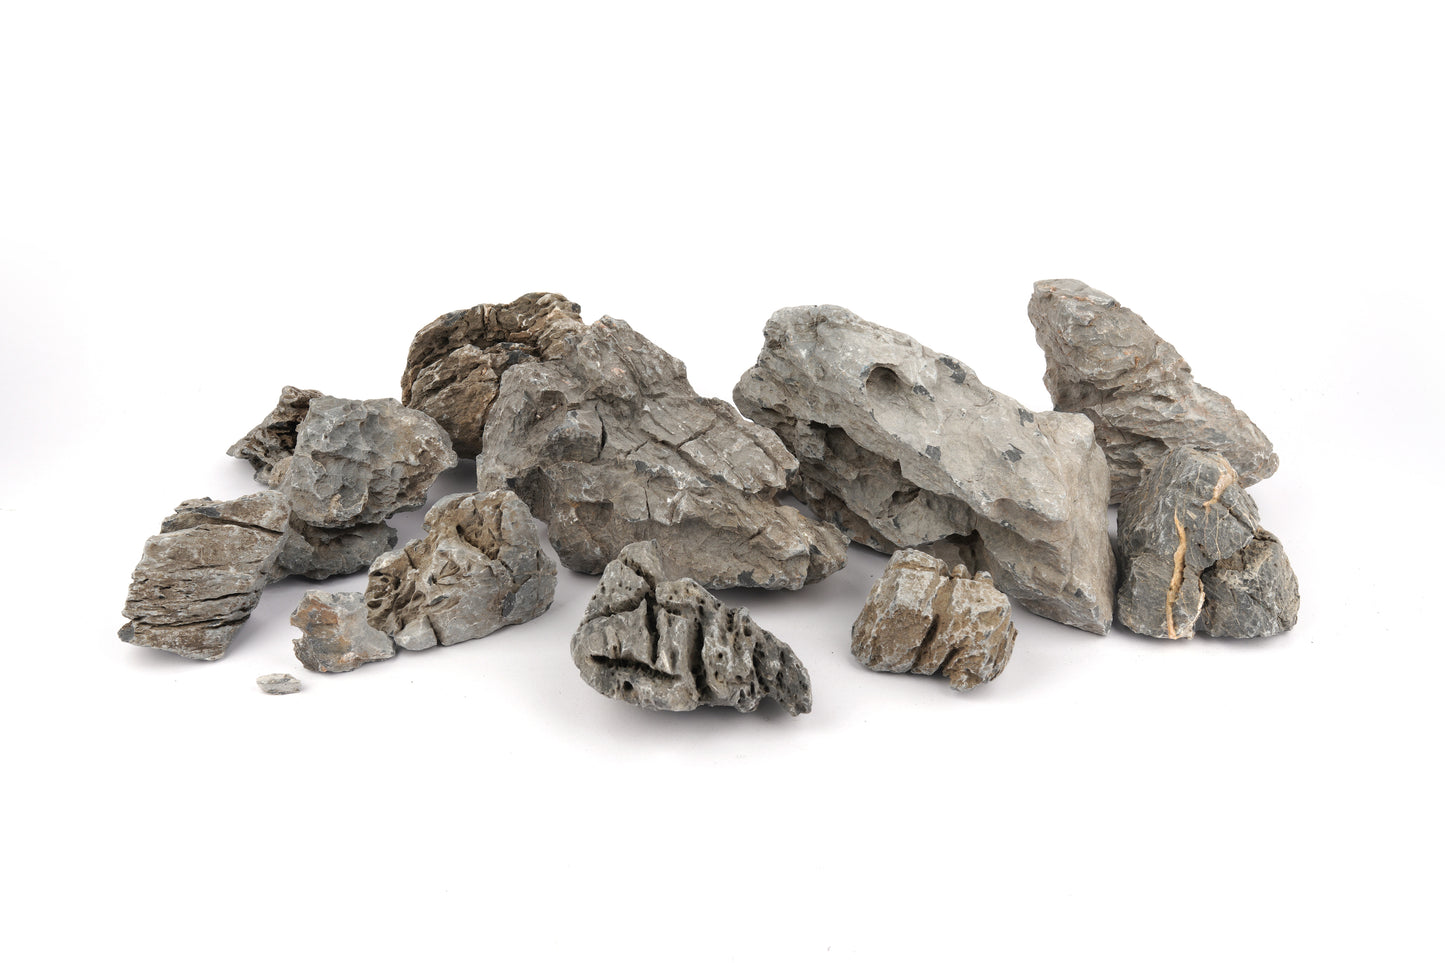 LANDEN Seiryu Stones Natural Rocks  for Aquascaping  (36lbs, 3-11inches) 11pcs